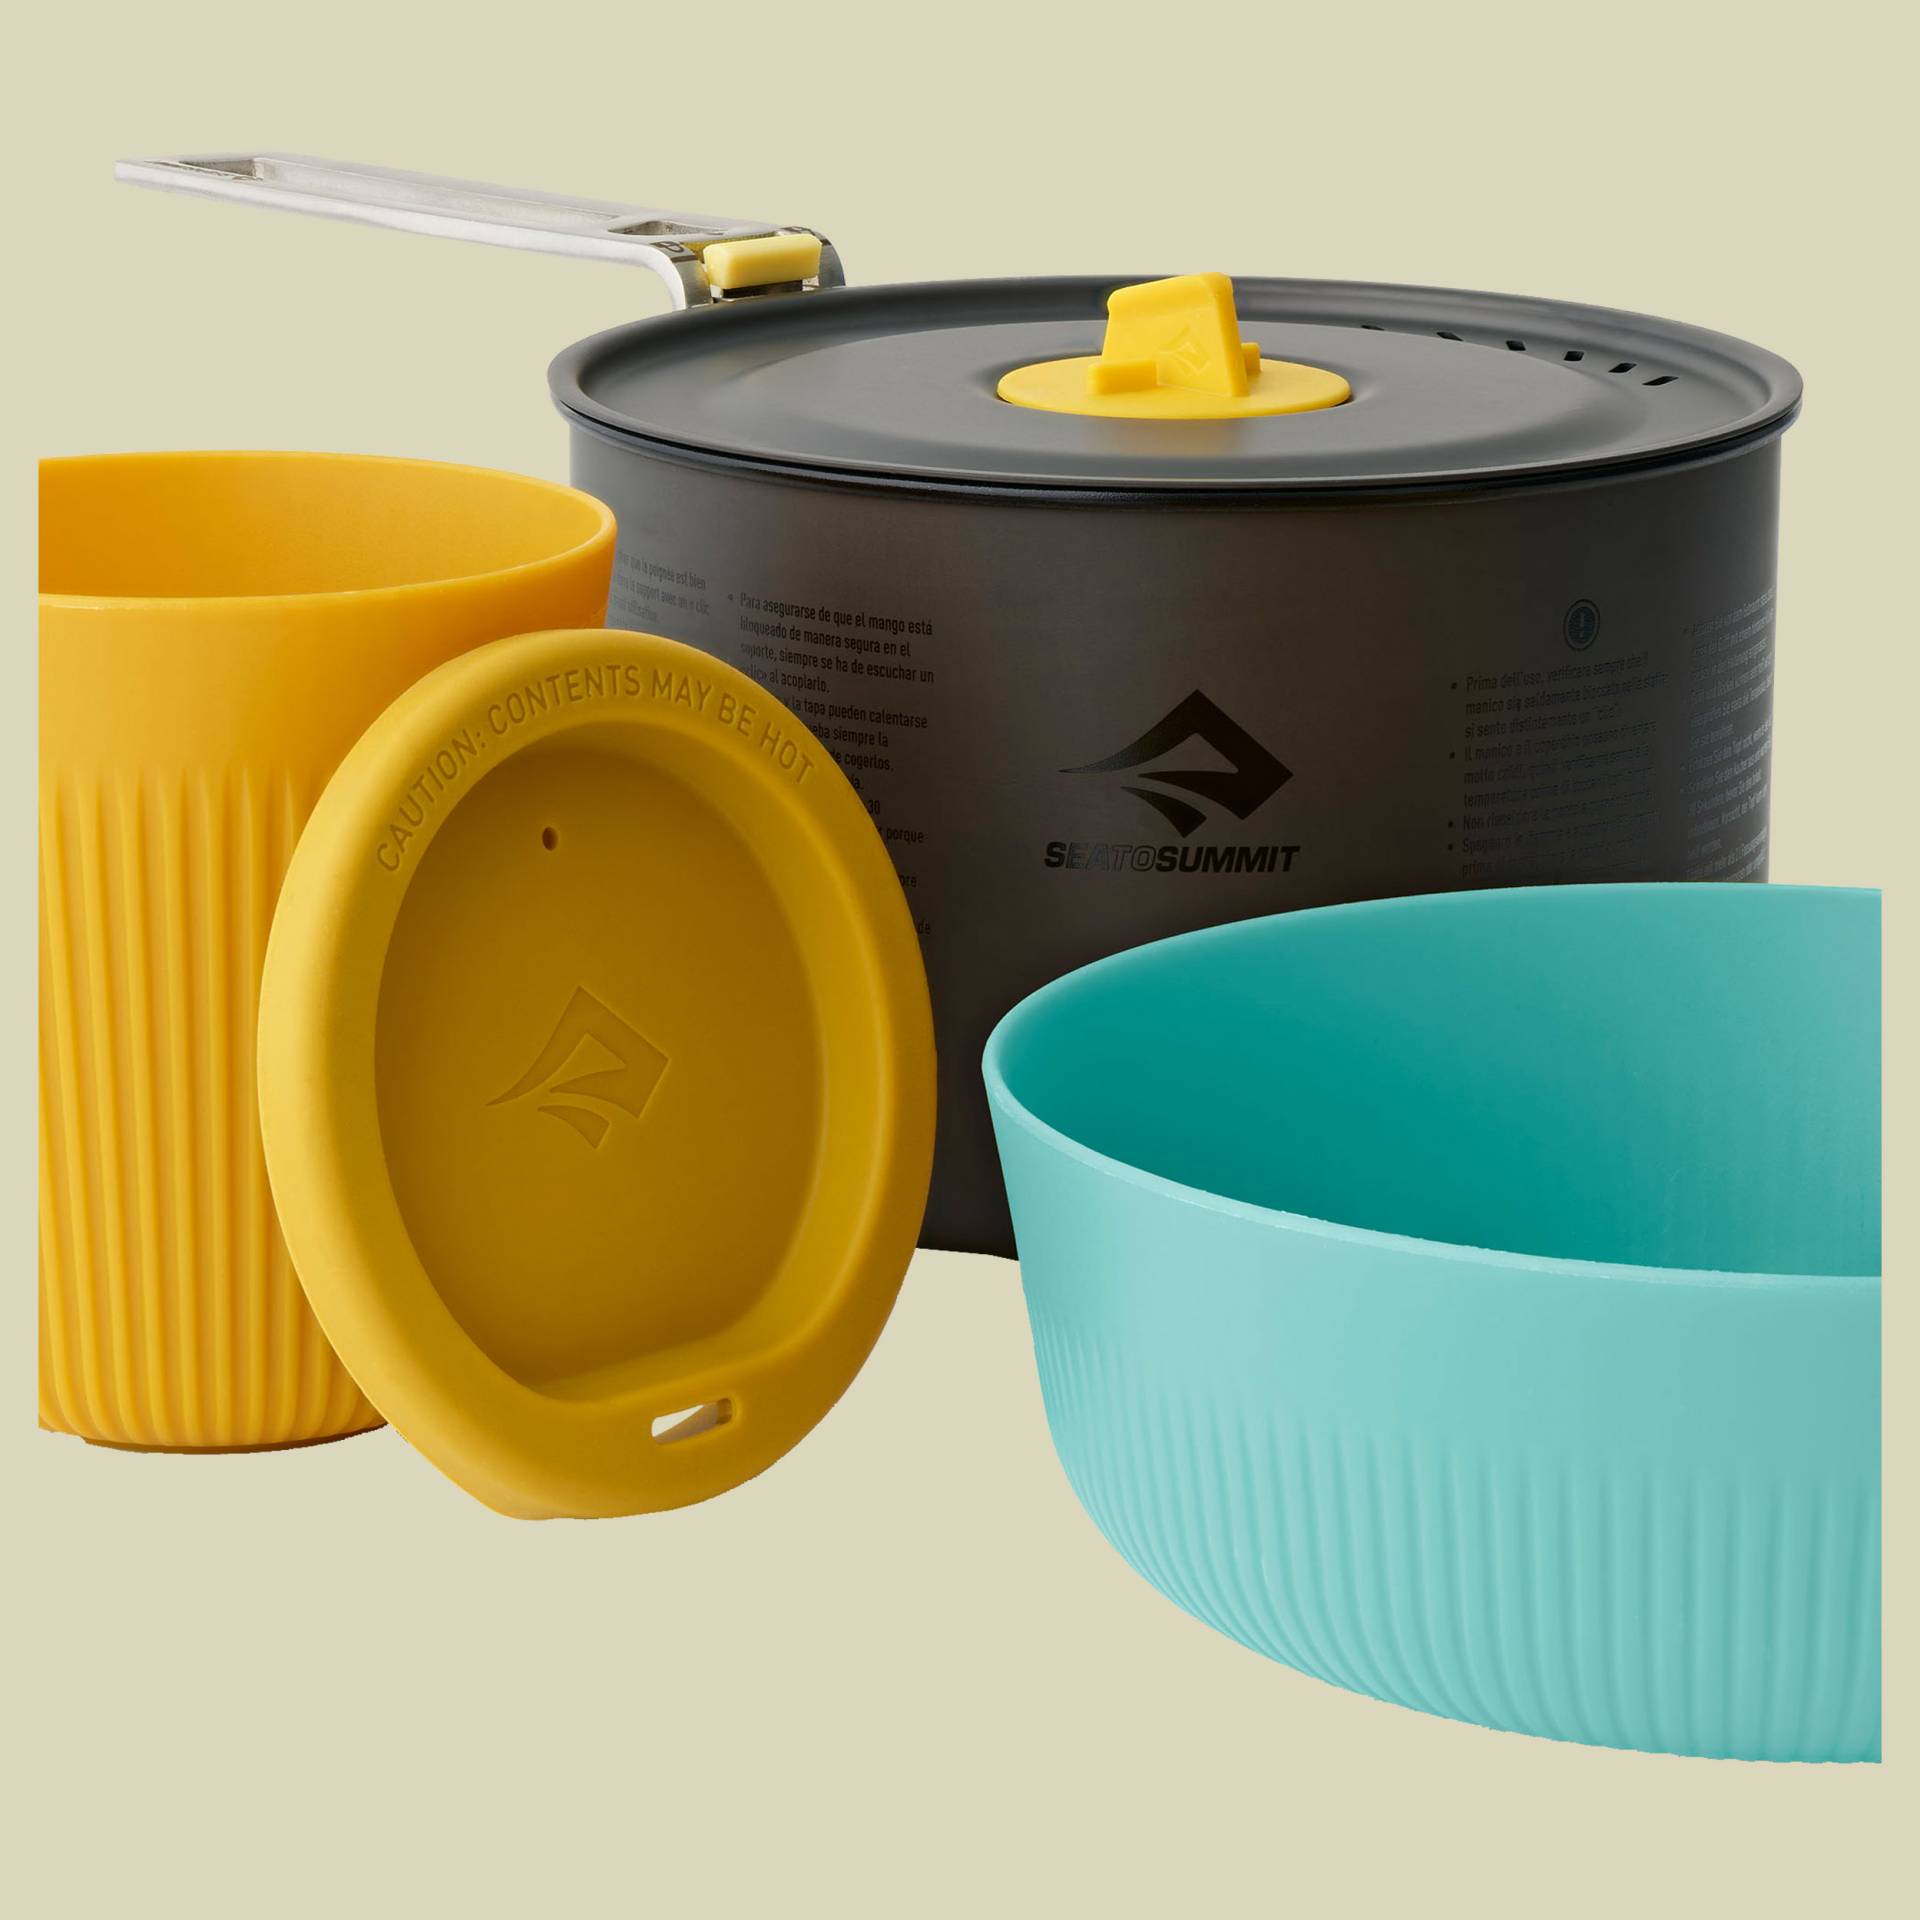 Frontier UL One Pot Cook Set - [1P] [3 Piece] 1 Person 1.3L Pot w/ S Bowl and Cup von Sea to Summit